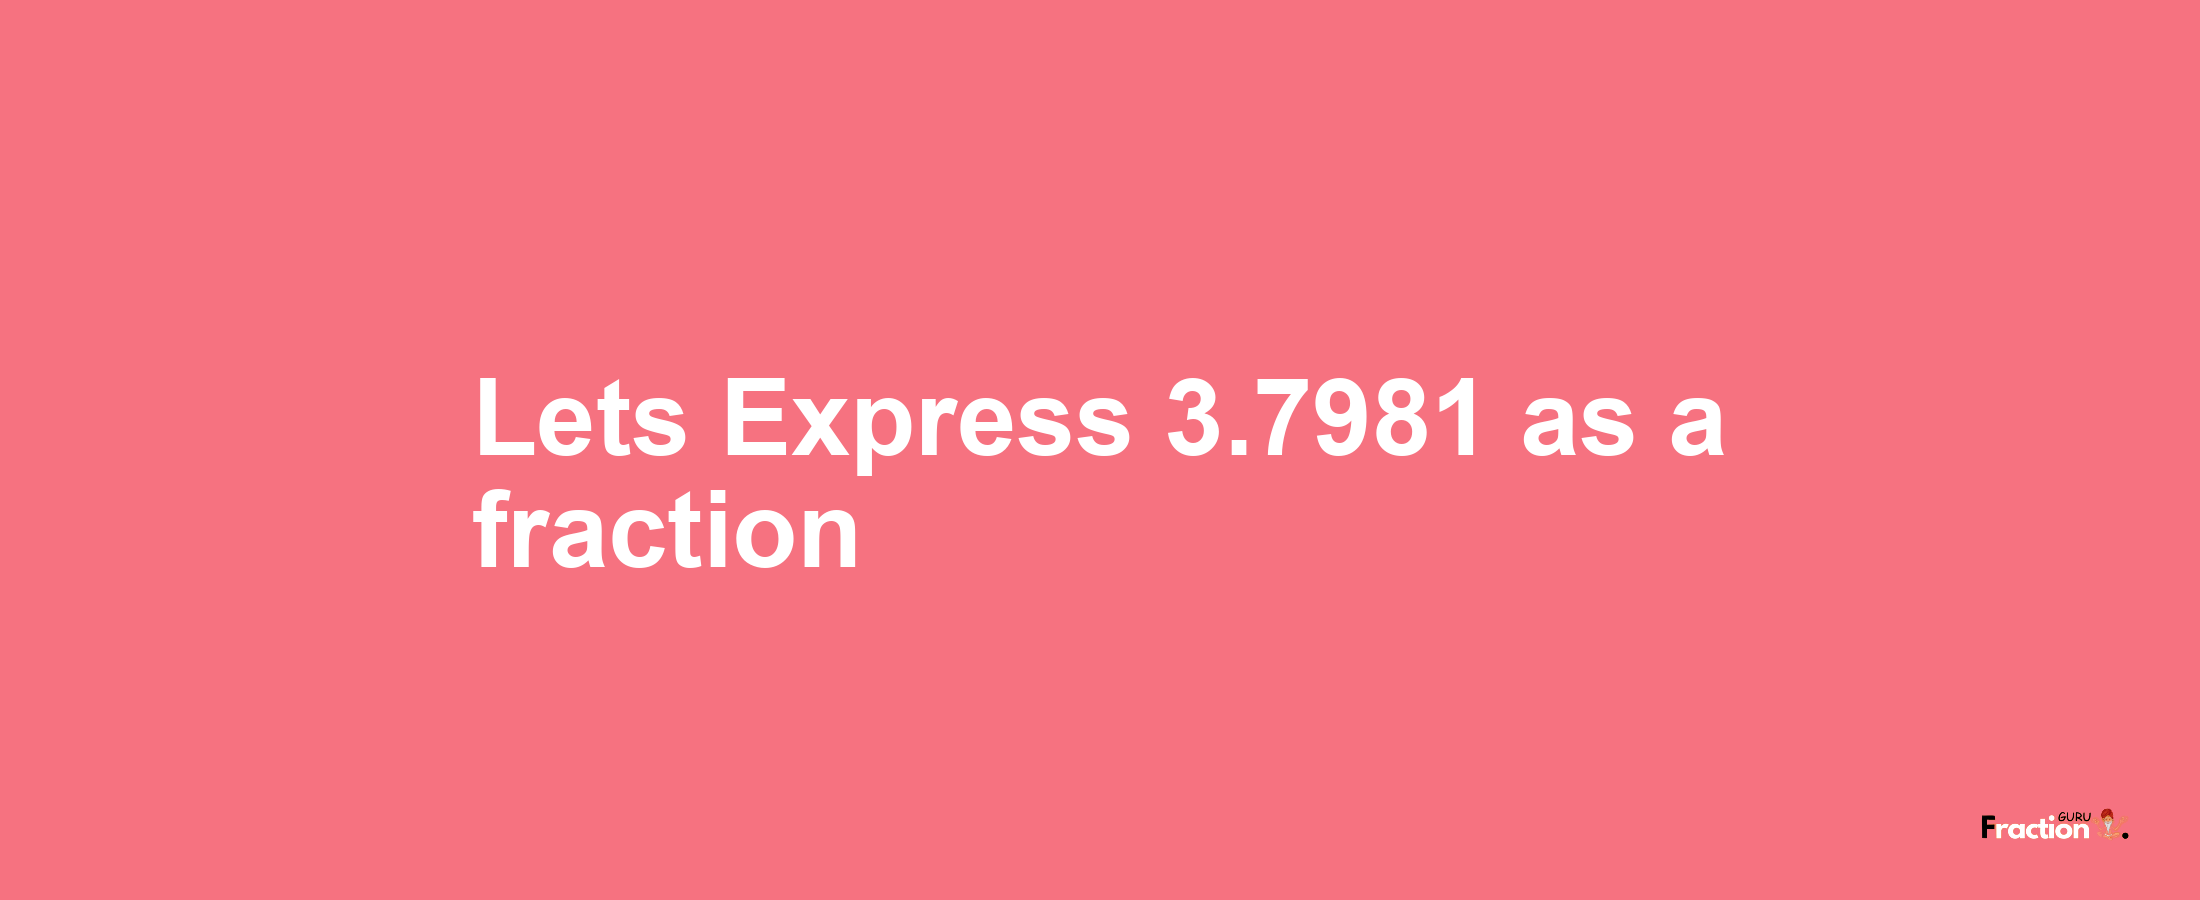 Lets Express 3.7981 as afraction